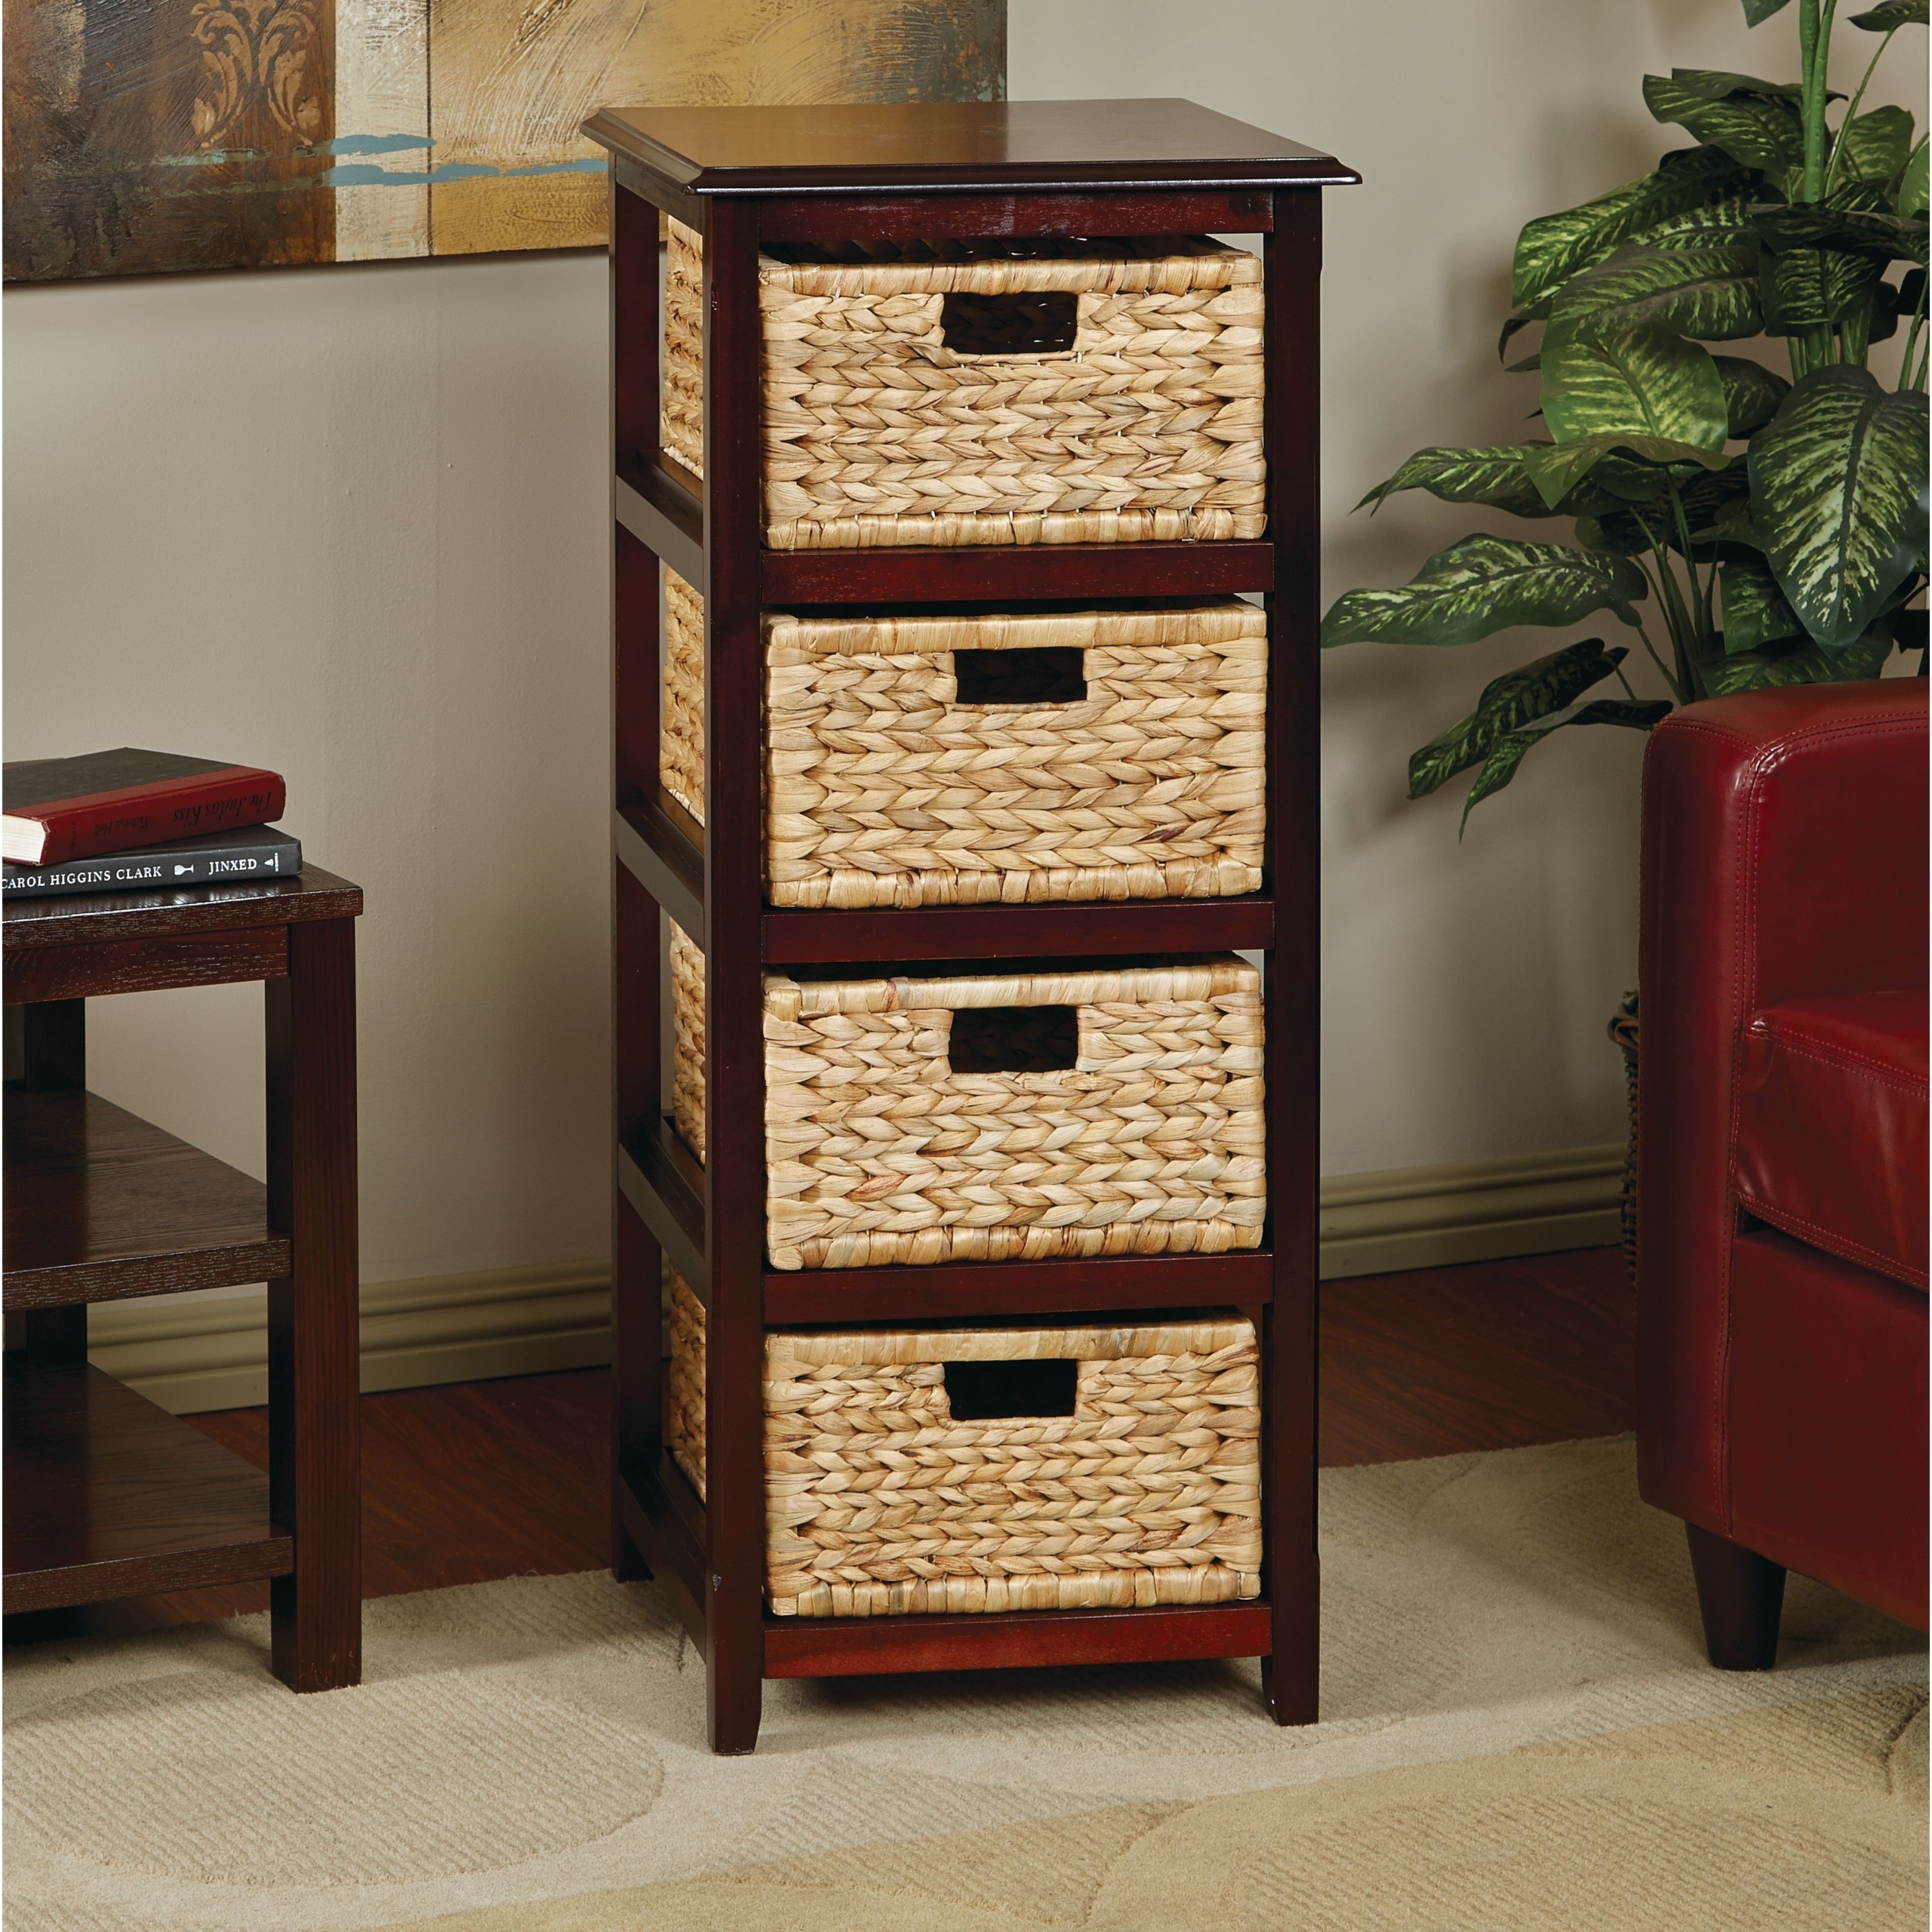 Storage tower with baskets 3